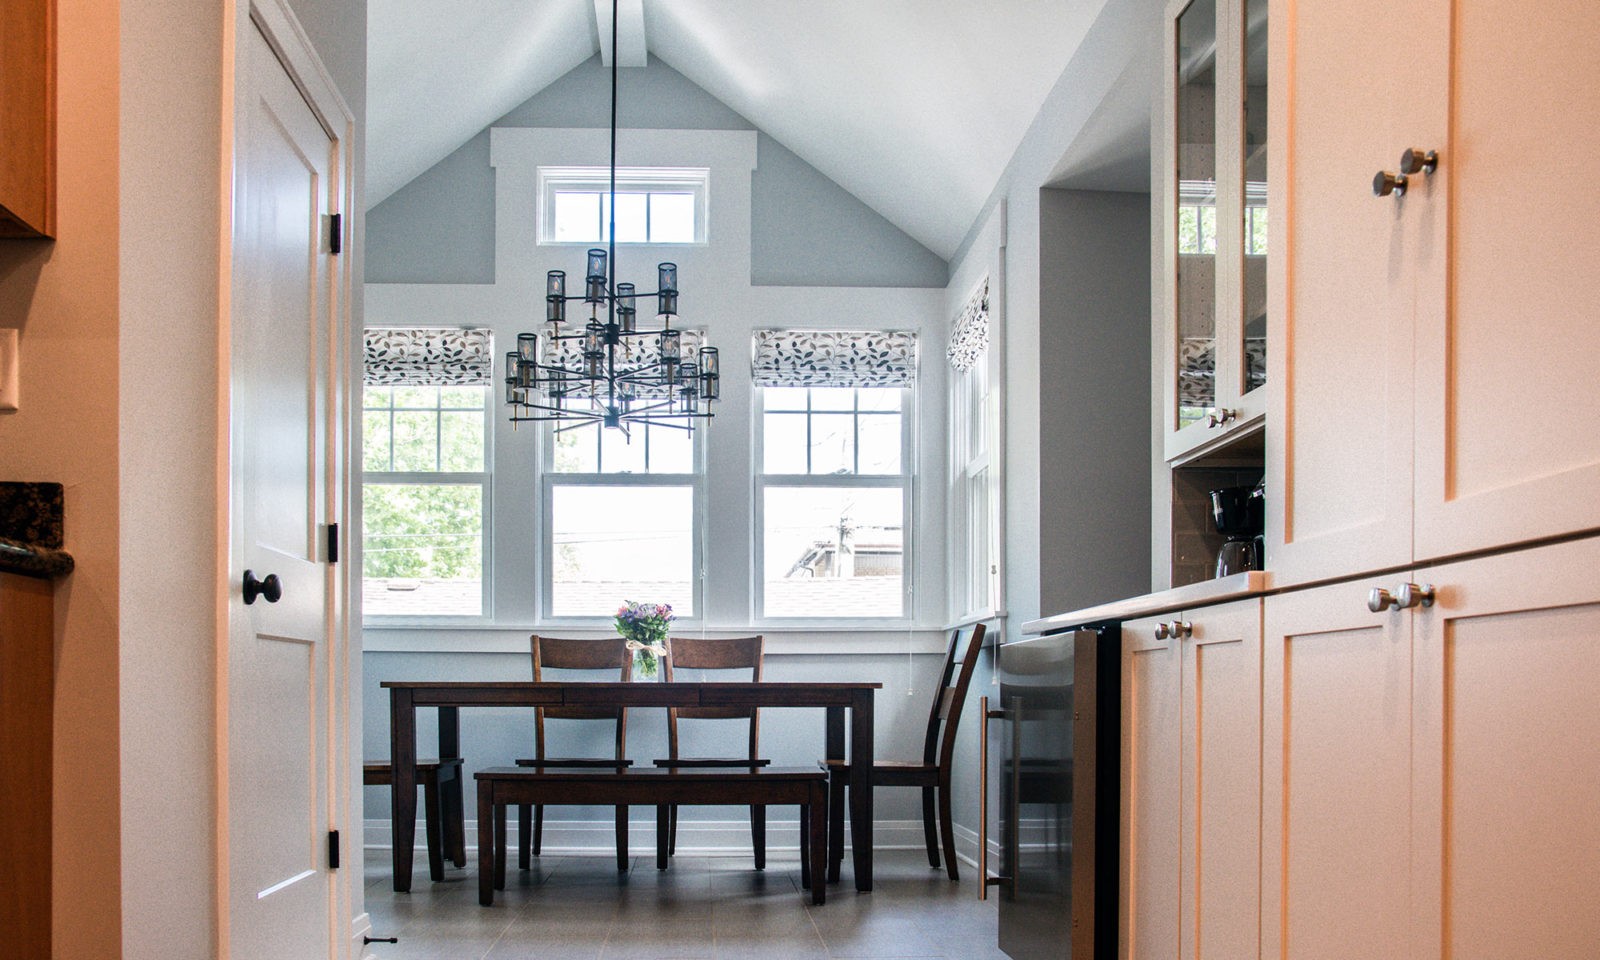 Dark brown kitchen table under a wooden chandelier in an A-frame ceiling kitchen with bright windows on the back wall